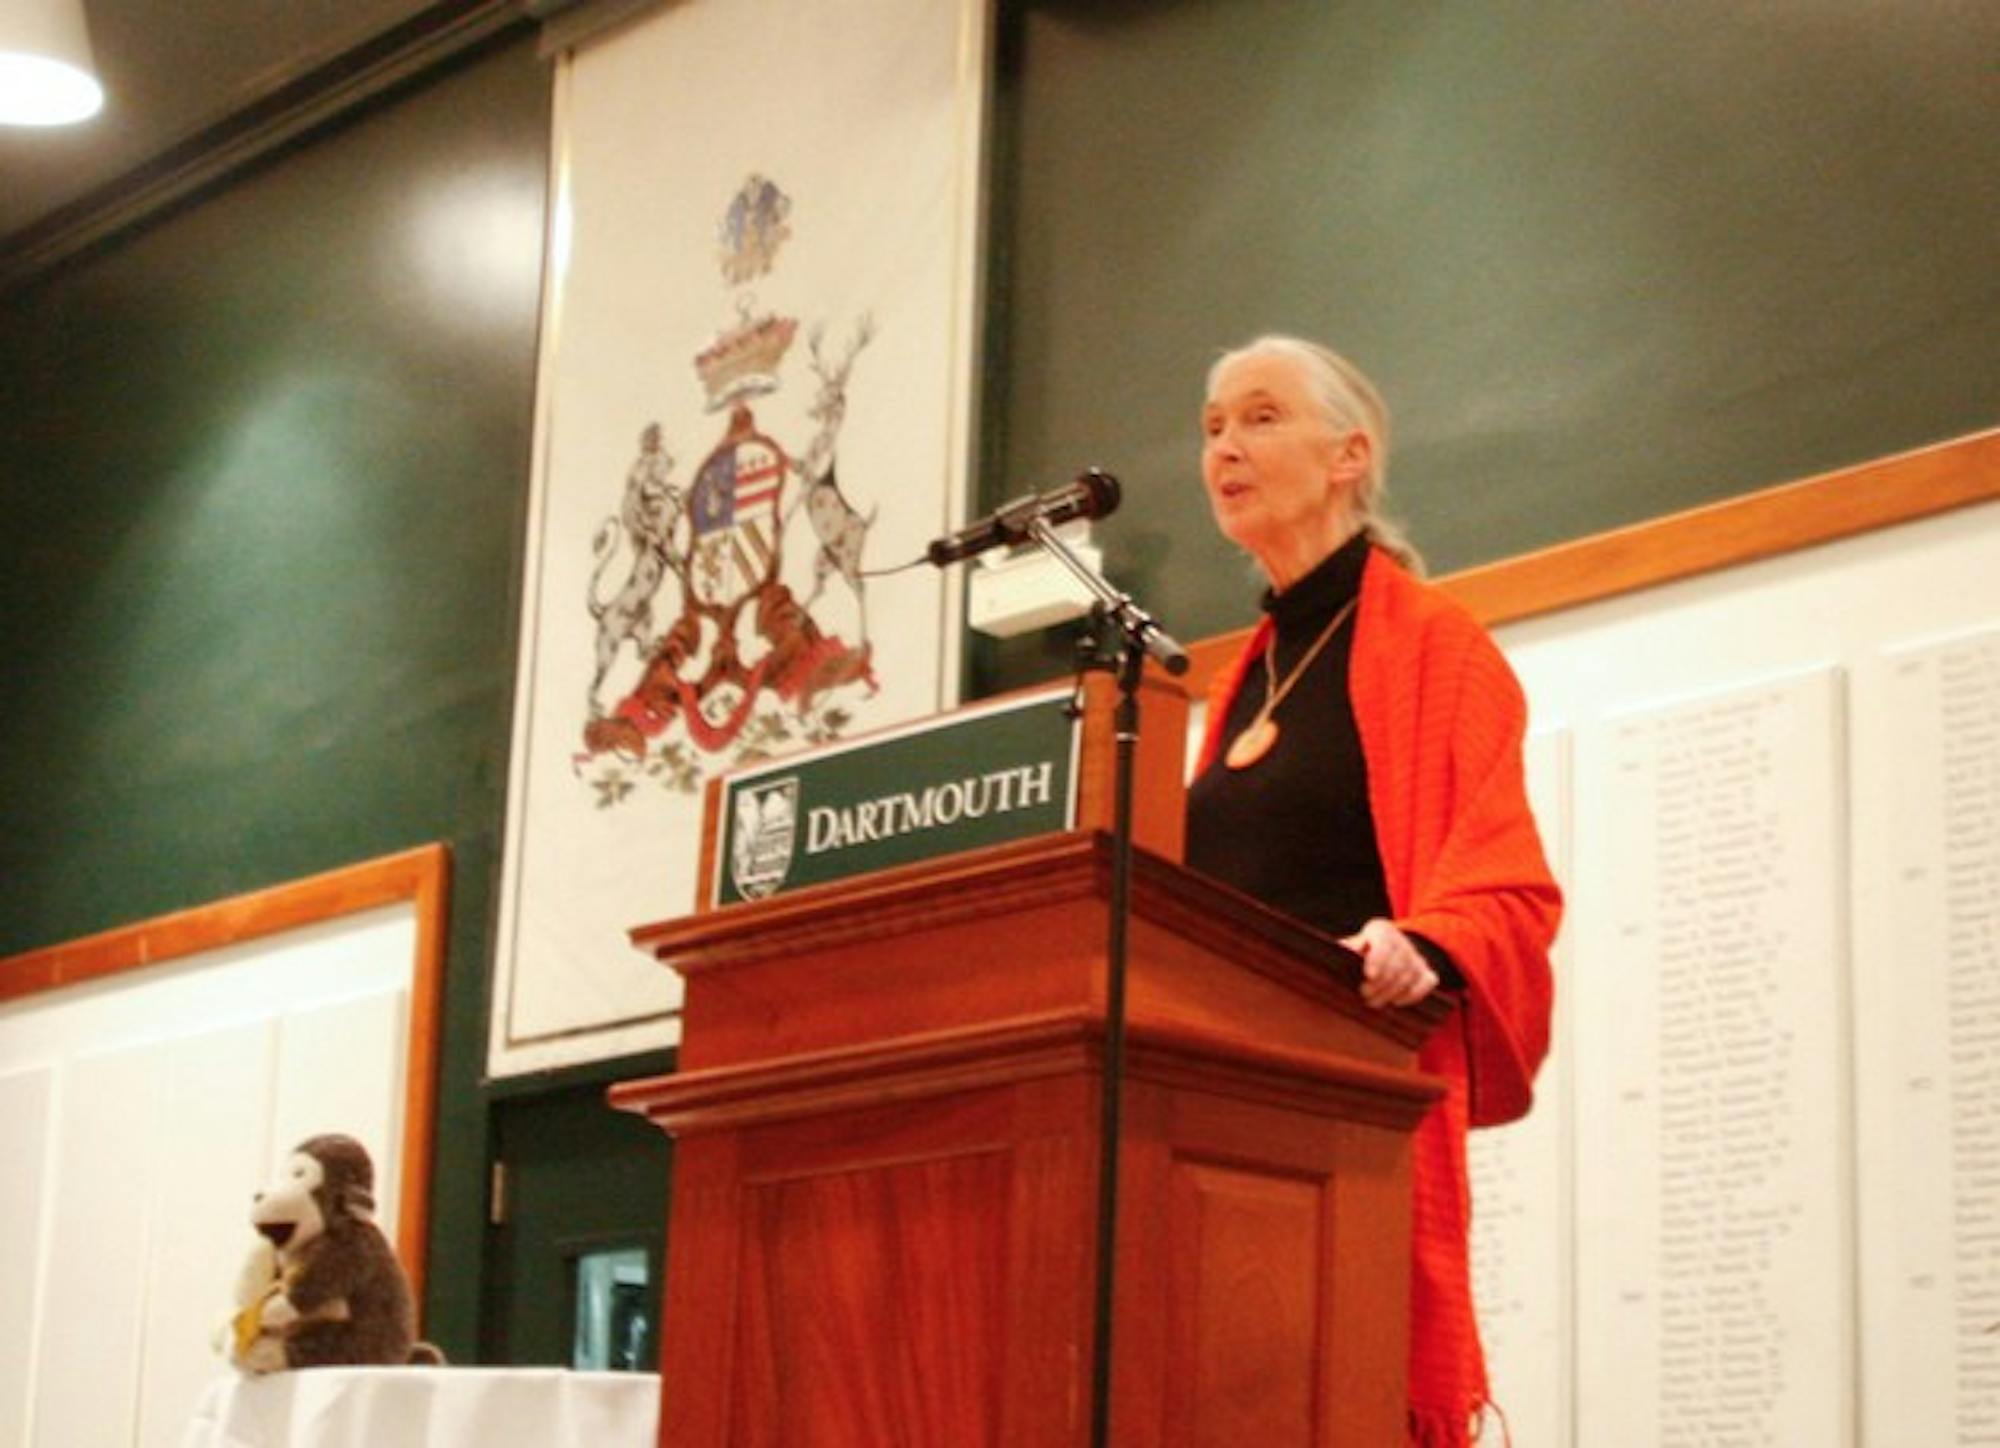 World-renowned primatologist Jane Goodall addresses an overflowing crowd Tuesday with her speech on inspiration in the face of suffering.